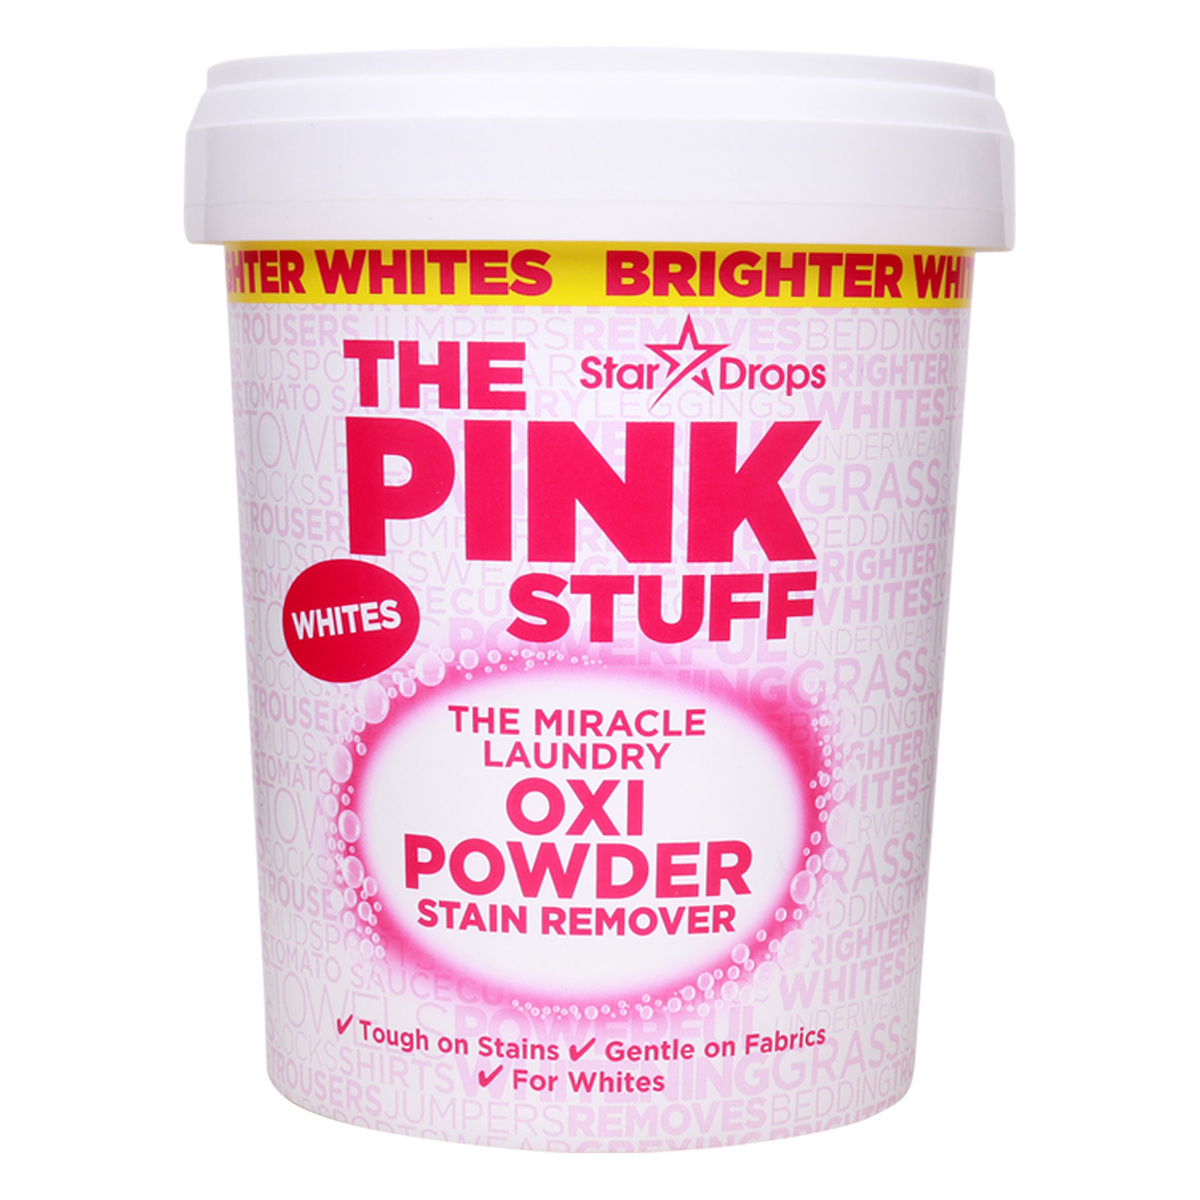 Star Drops Pink Stuff Whites Miracle Laundry Oxi Powder Stain Remover 1 kg